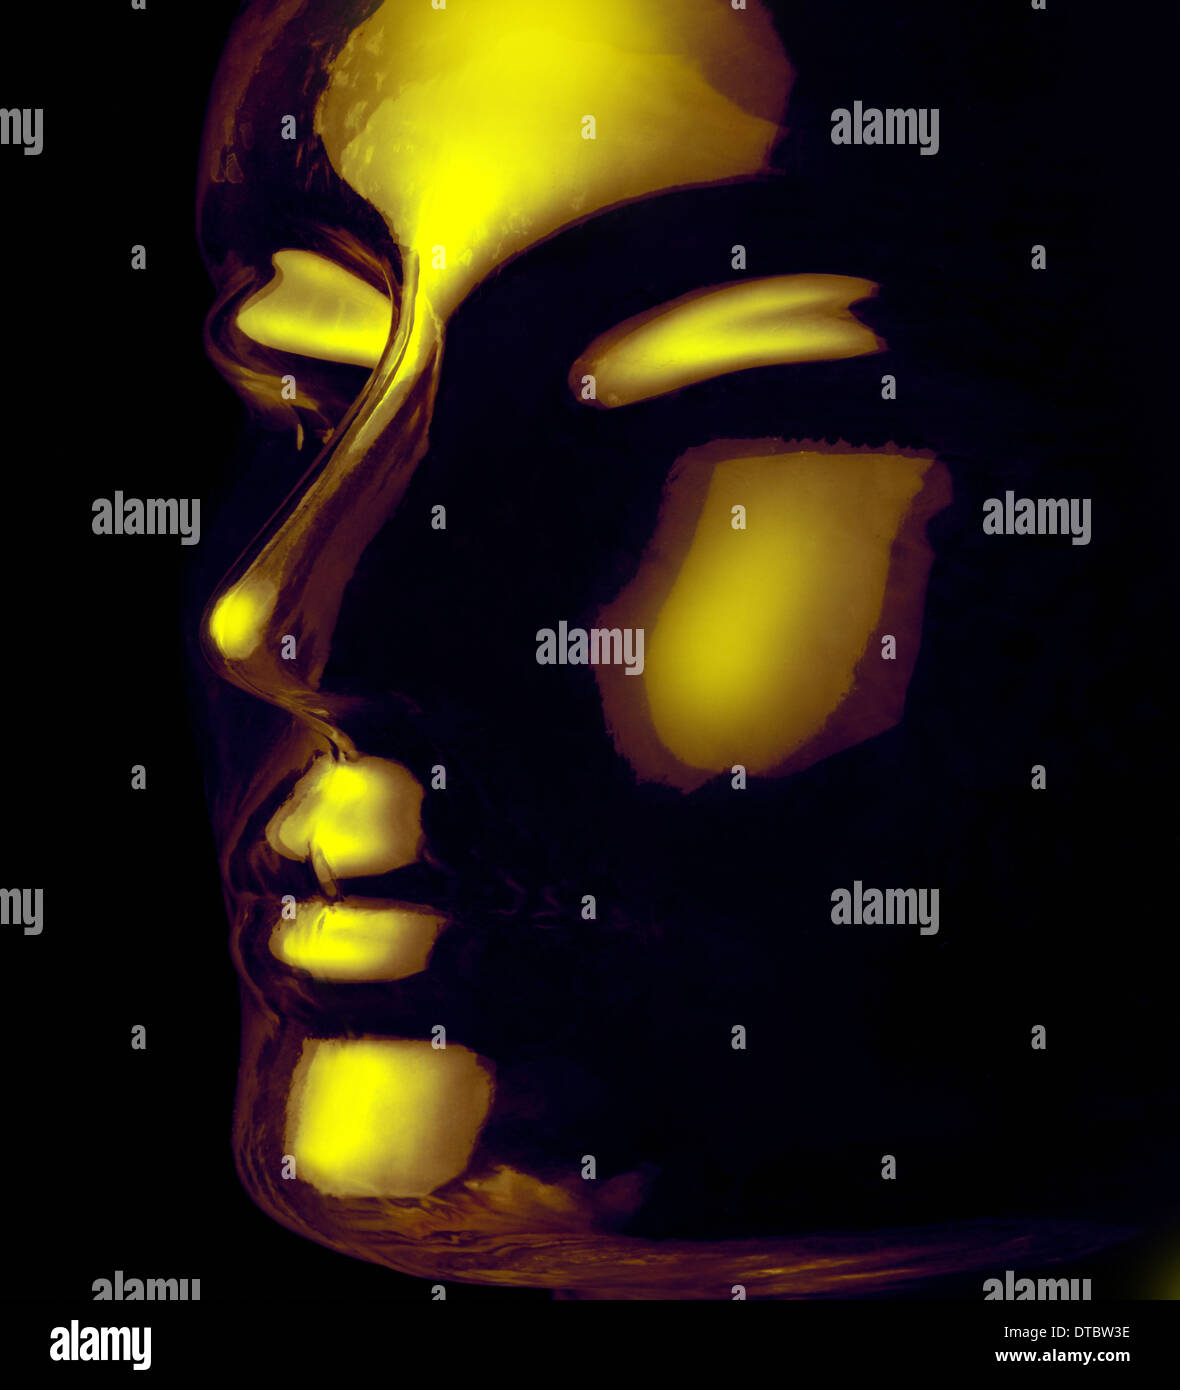 futuristic science theme showing a opalescent and translucent reflective human head made of glass in black back Stock Photo